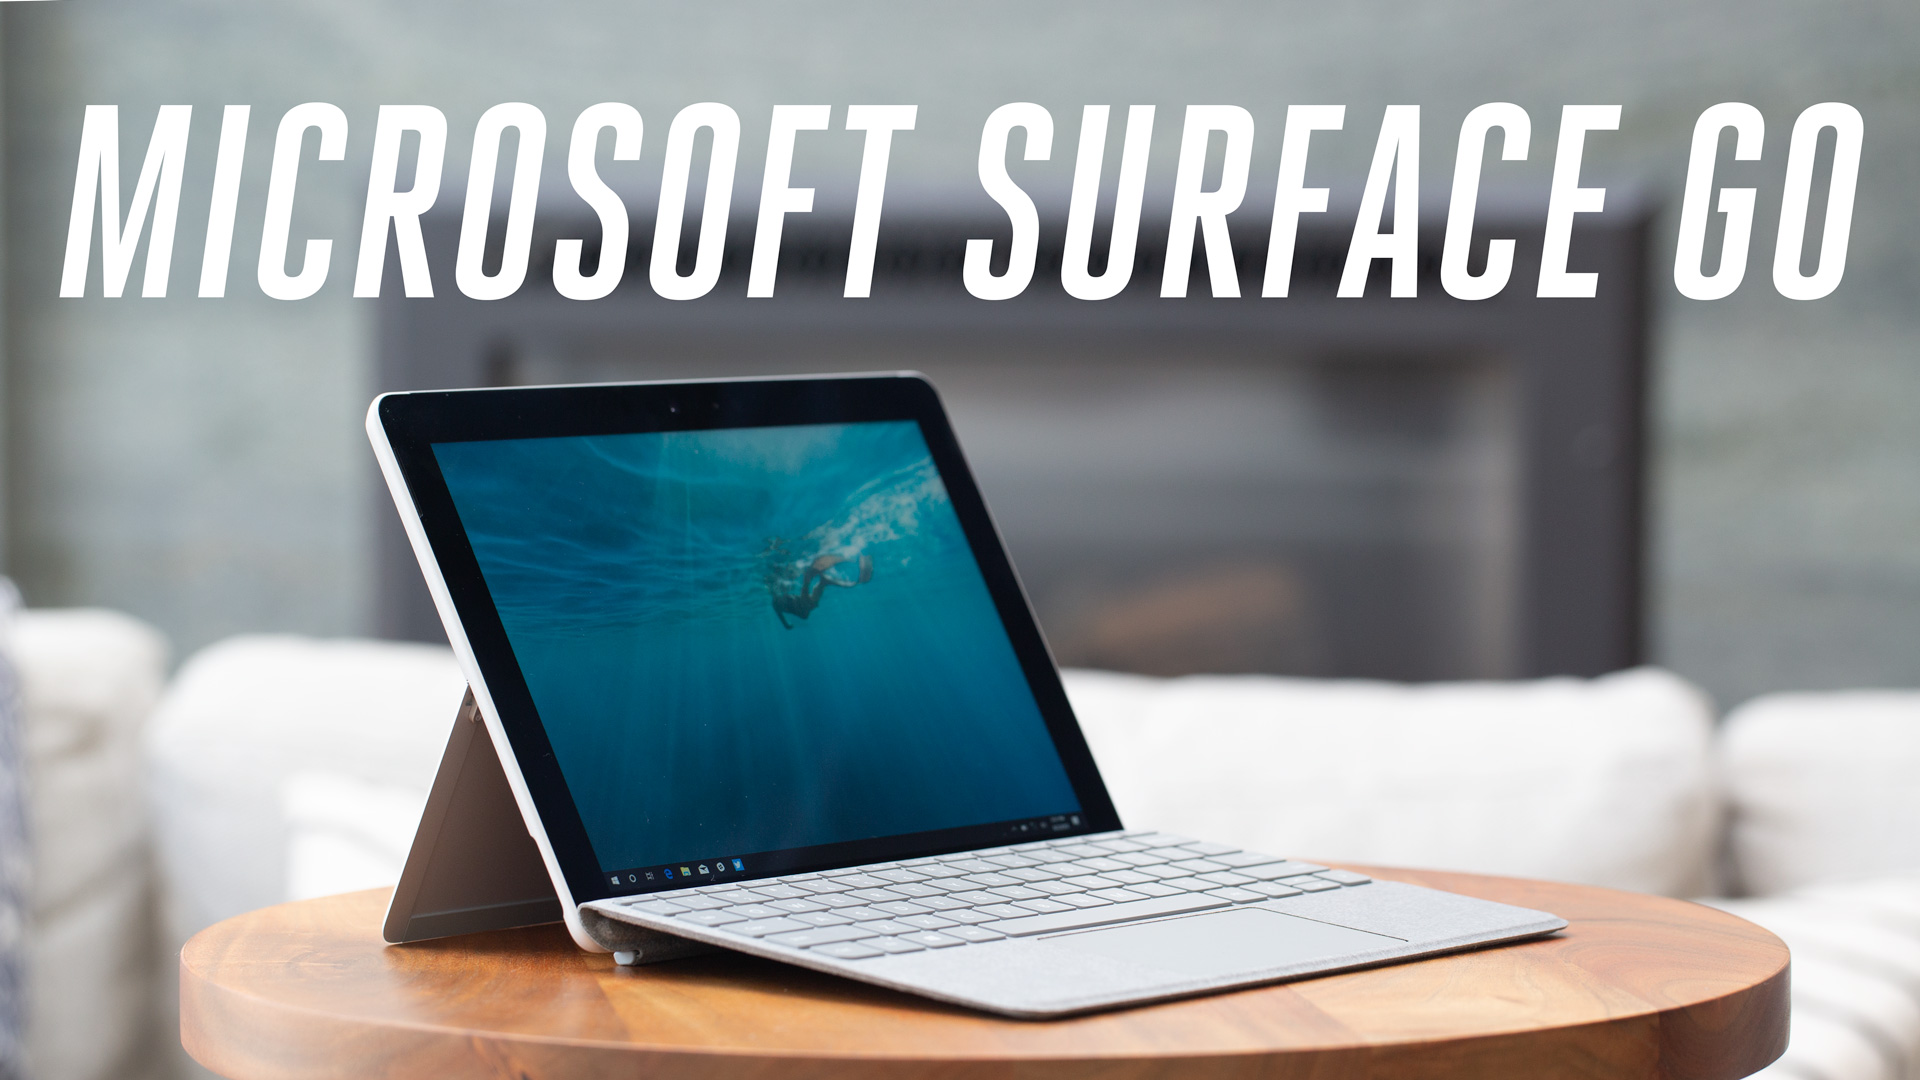 Microsoft Announces The Surface Go: Smaller And Less Expensive